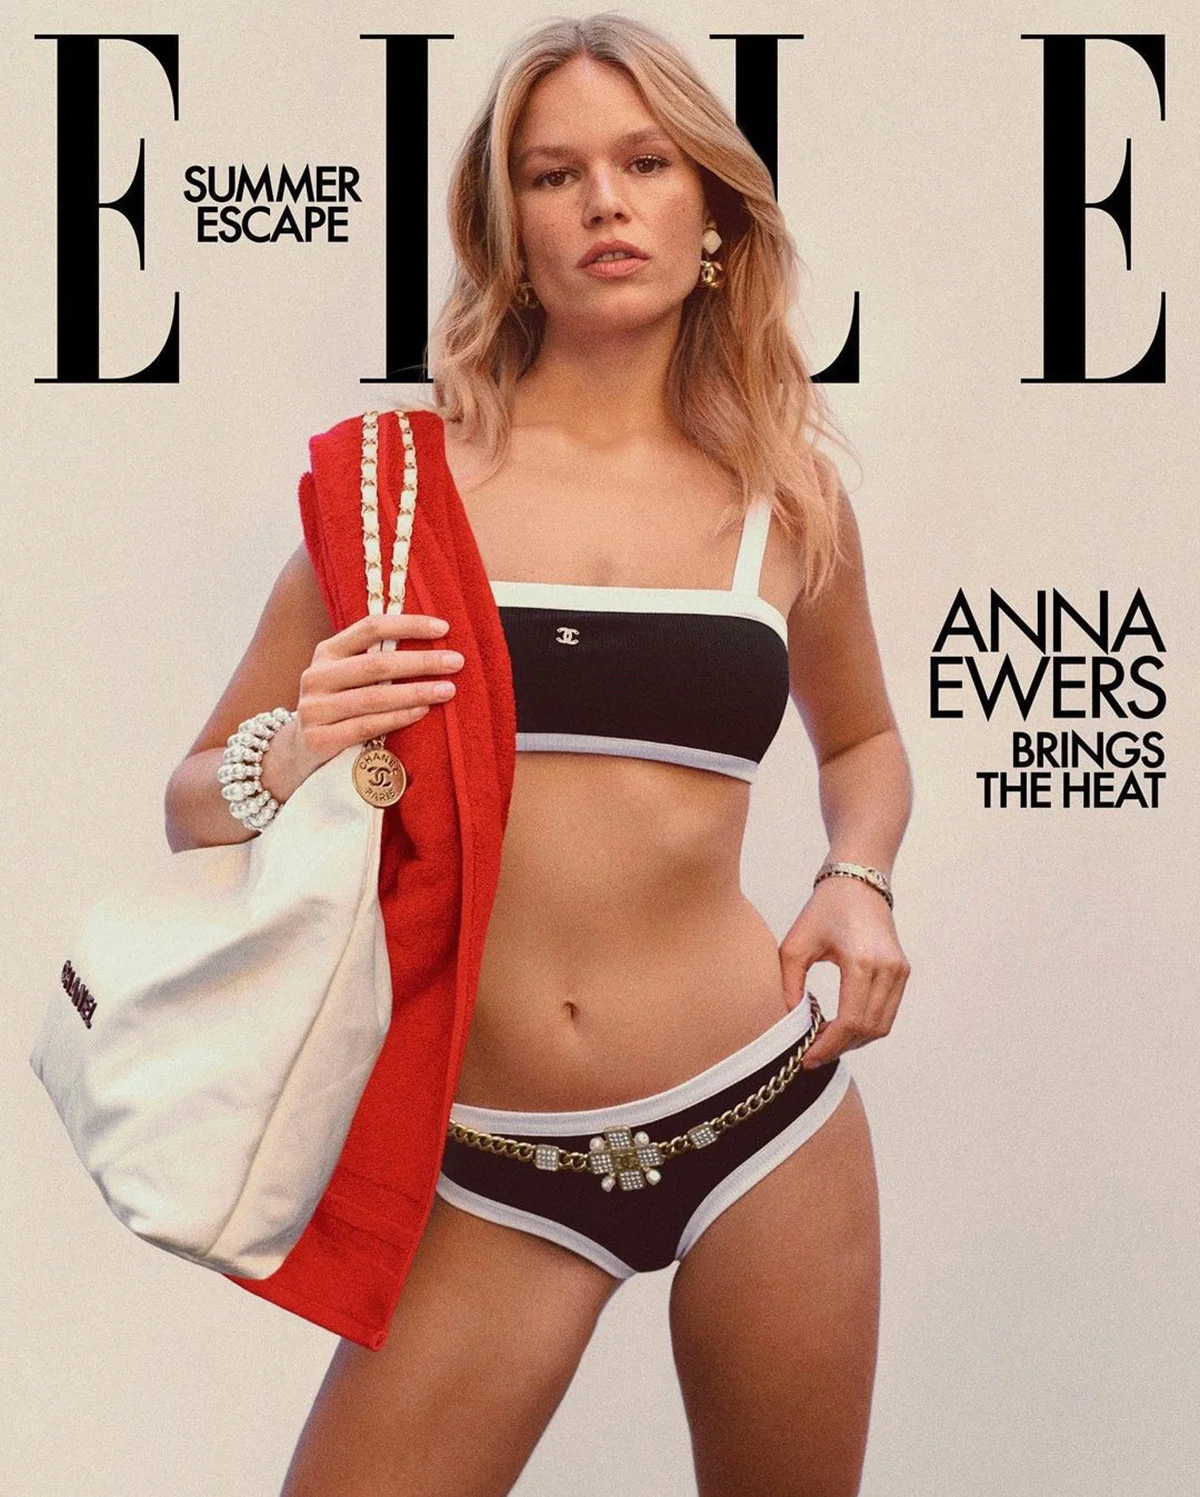 Anna Ewers covers Elle US Summer Escape 2022 by Chris Colls